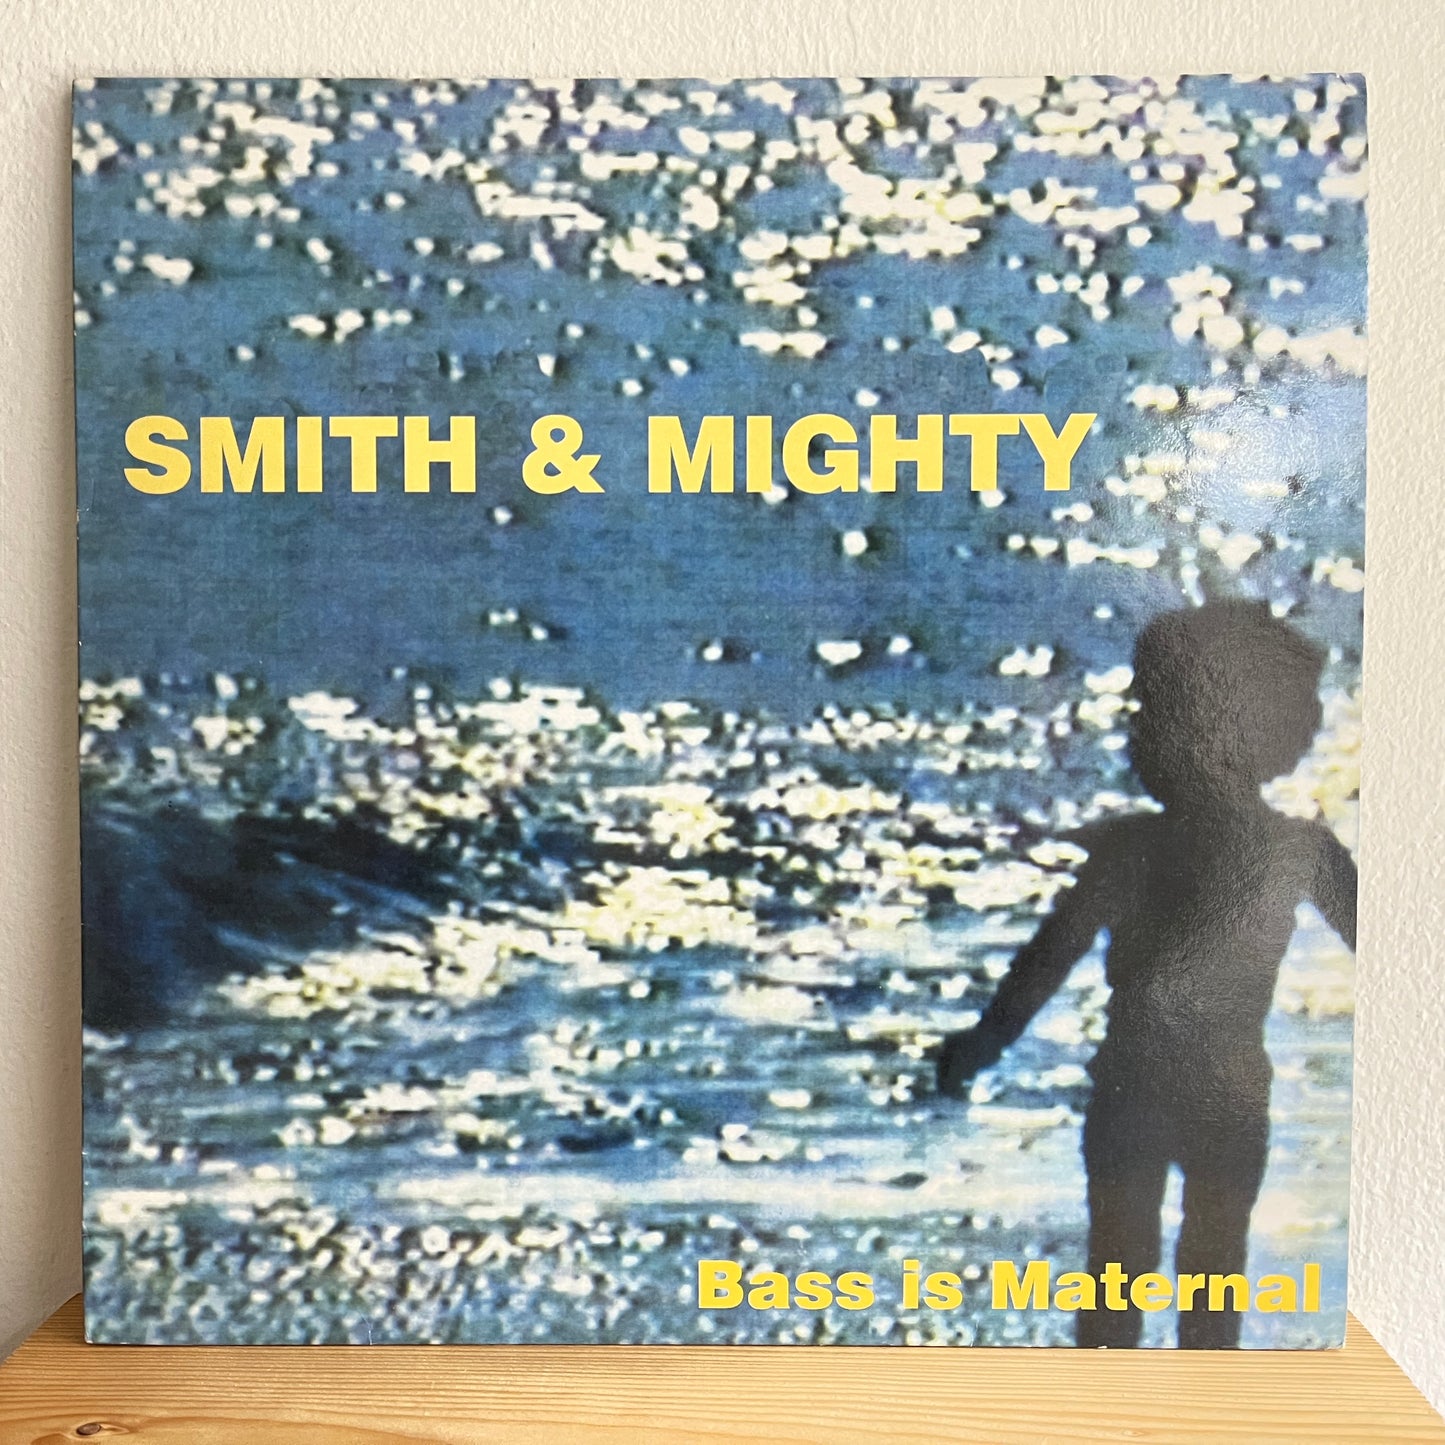 Smith & Mighty – Bass Is Maternal